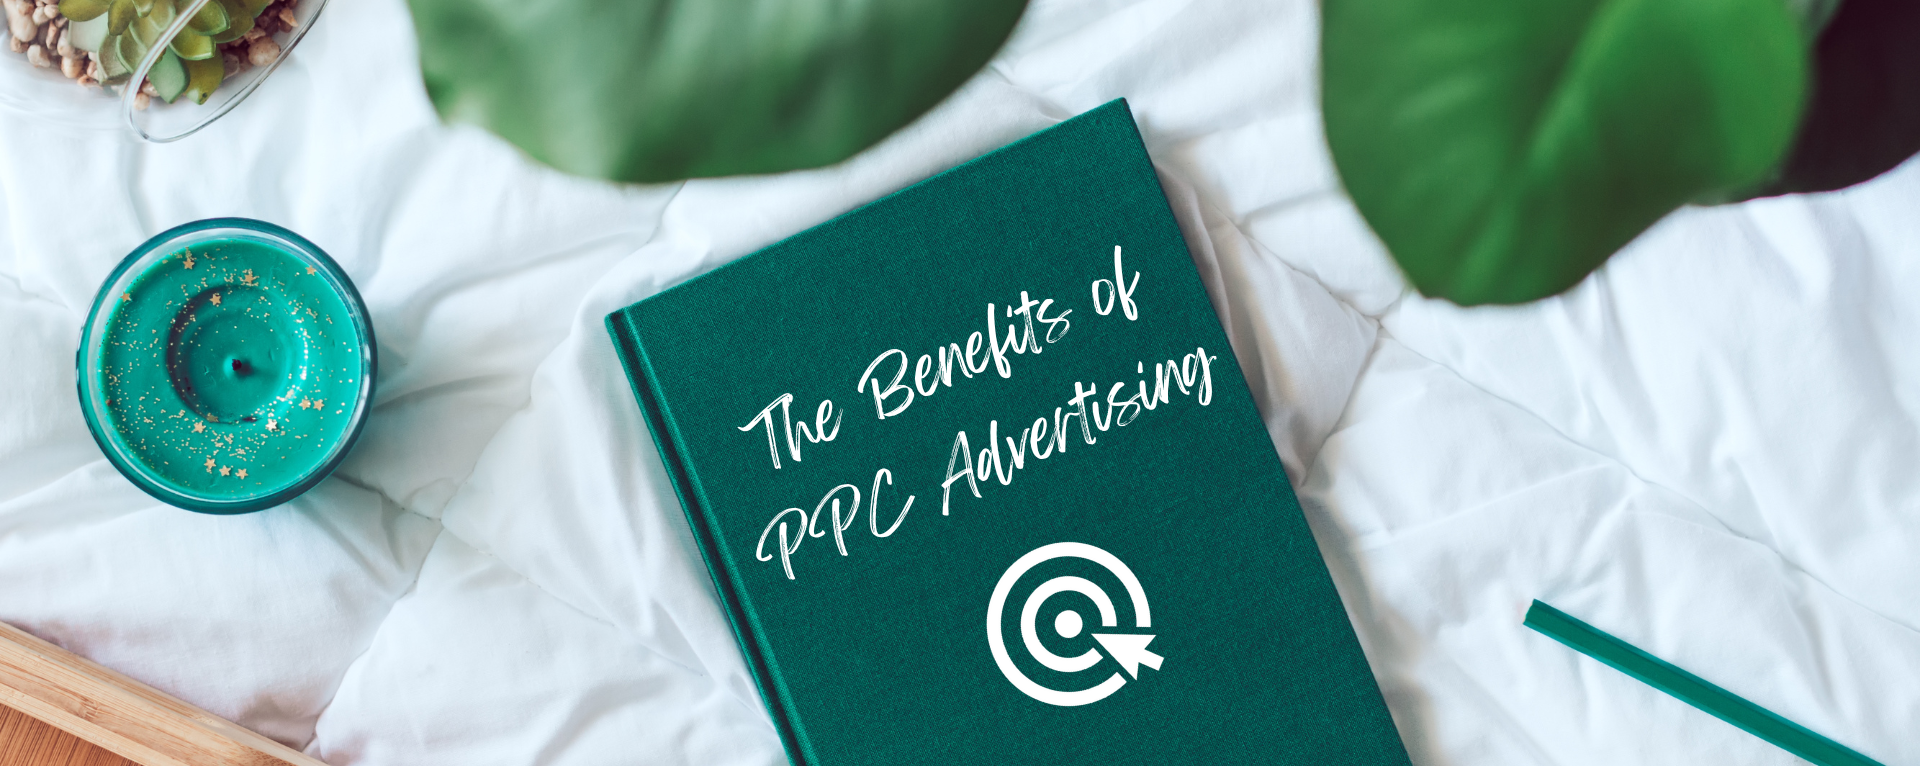 BLOG-39-The-Benefits-of-PPC-Advertising-Why-Your Business-Needs-It